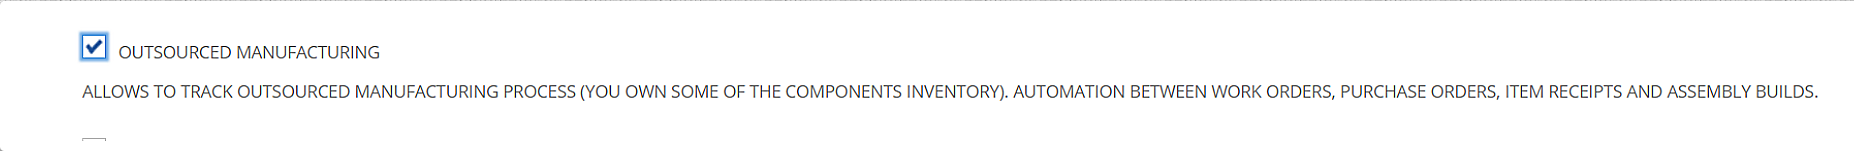 In the Inventory section, check the box labeled “Outsourced Manufacturing”.